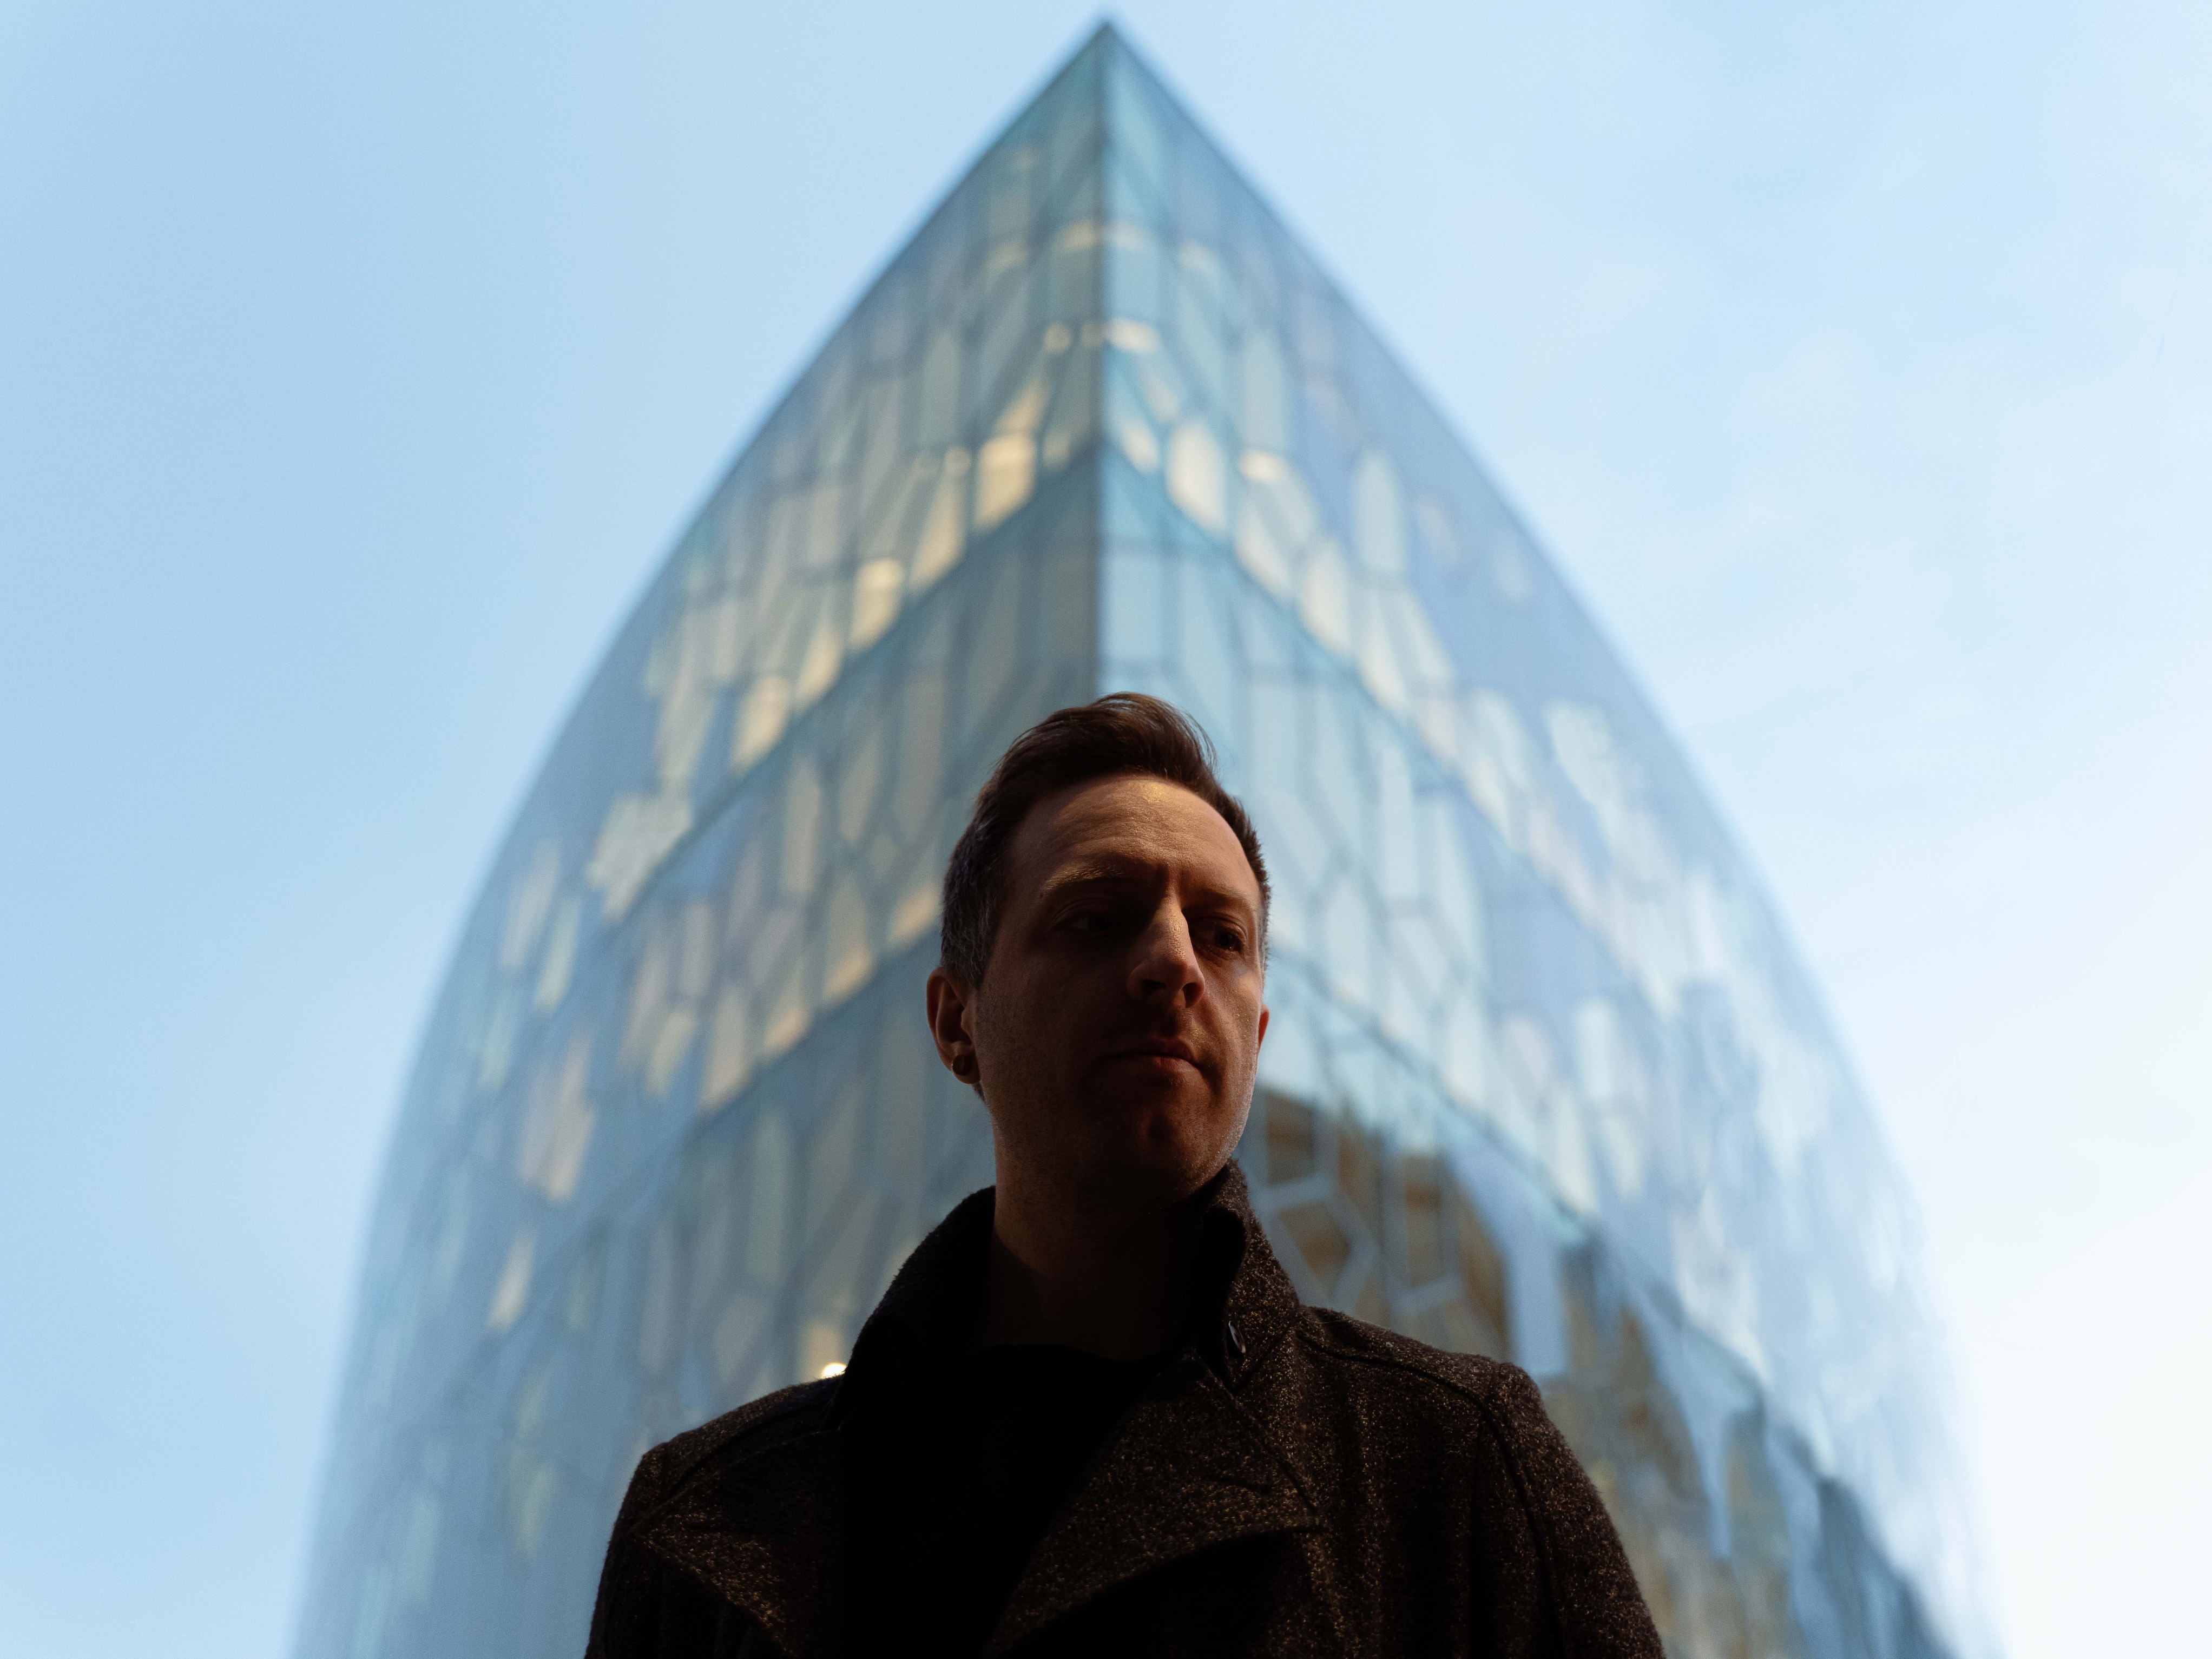 Promotional photo for "The Voyage" which sees Defunk standing in front of a tall glass corner building.